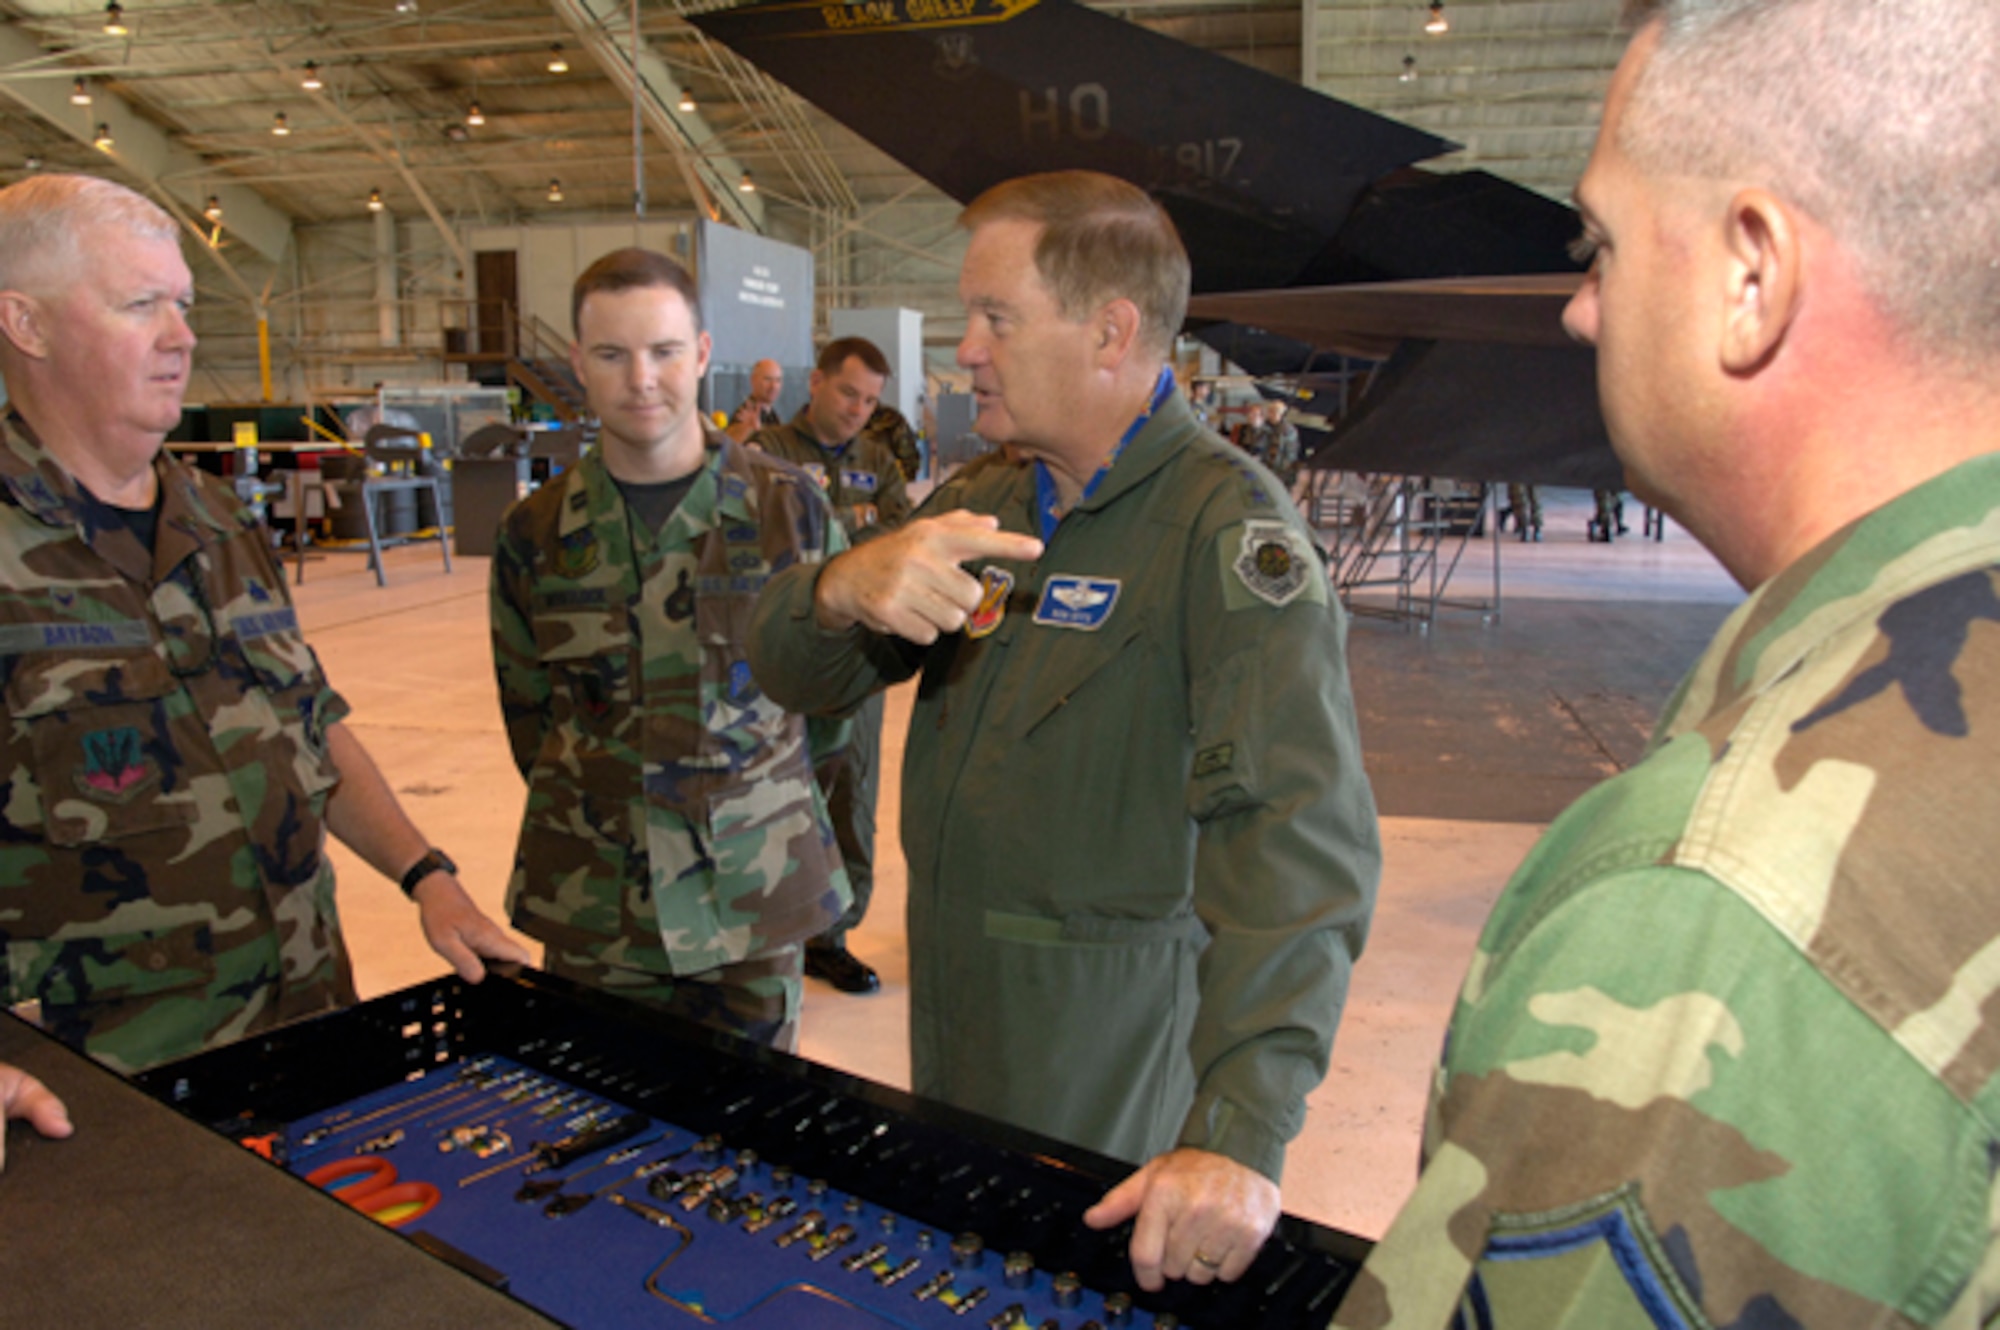 Gen. Ronald Keys discusses the maintenance of the F-117A with Col. Gary Bryson, Maintenance Group commander, during a recent visit to Holloman AFB, NM.